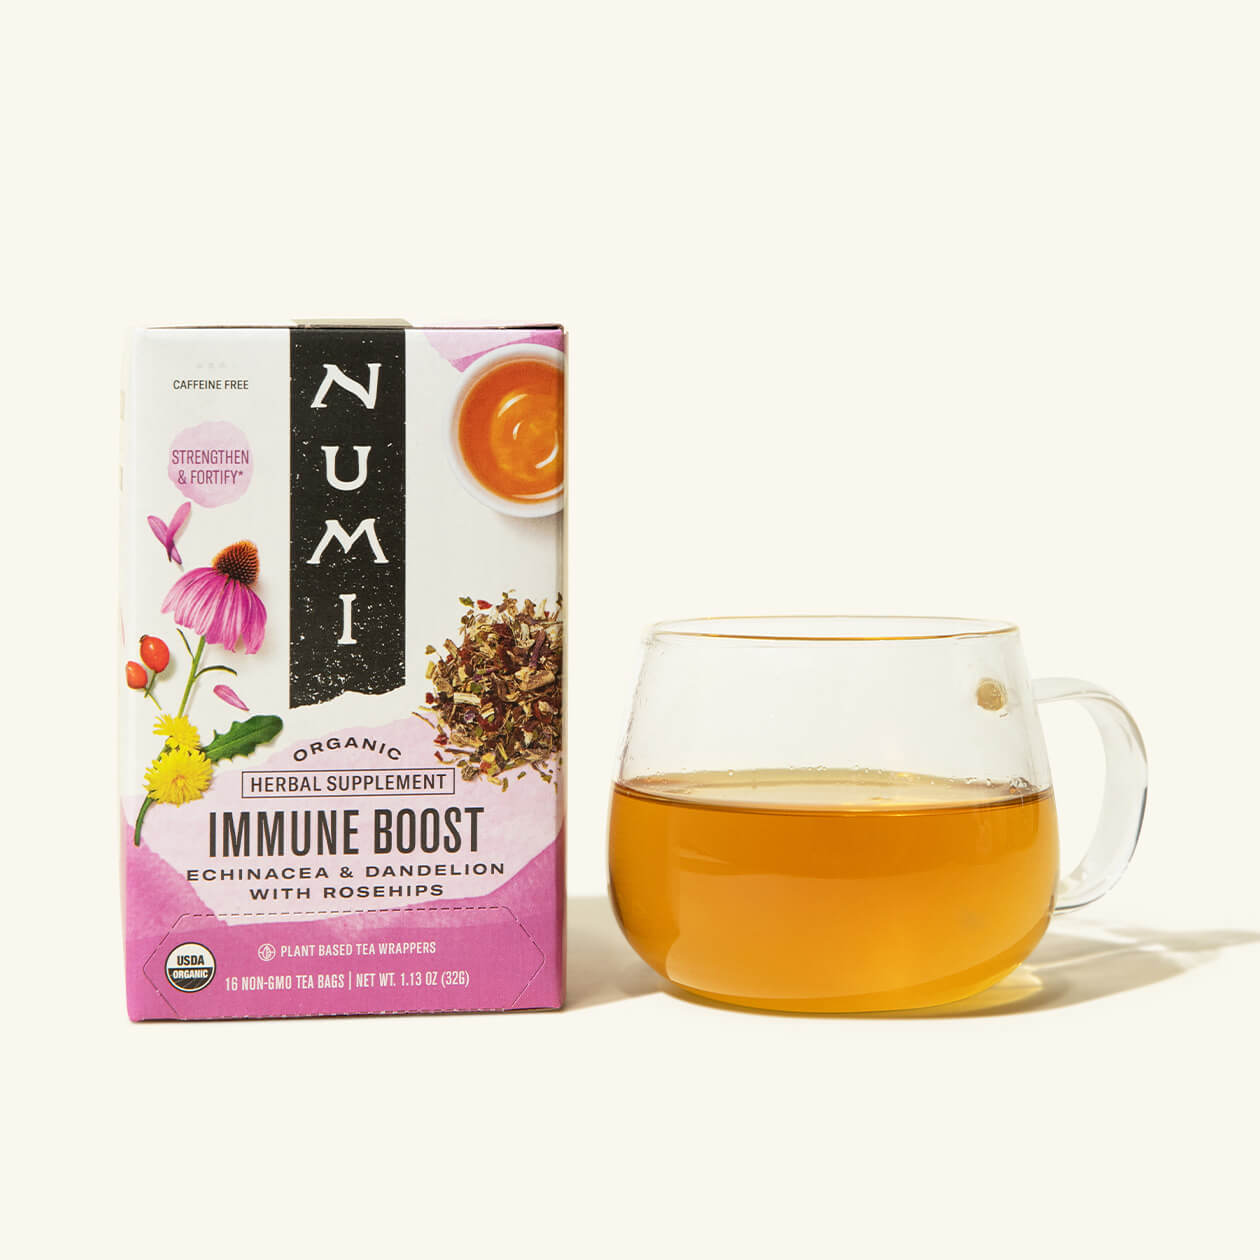 A box of Numi's Immune Boost tea next to a brewed cup of tea in a clear cup